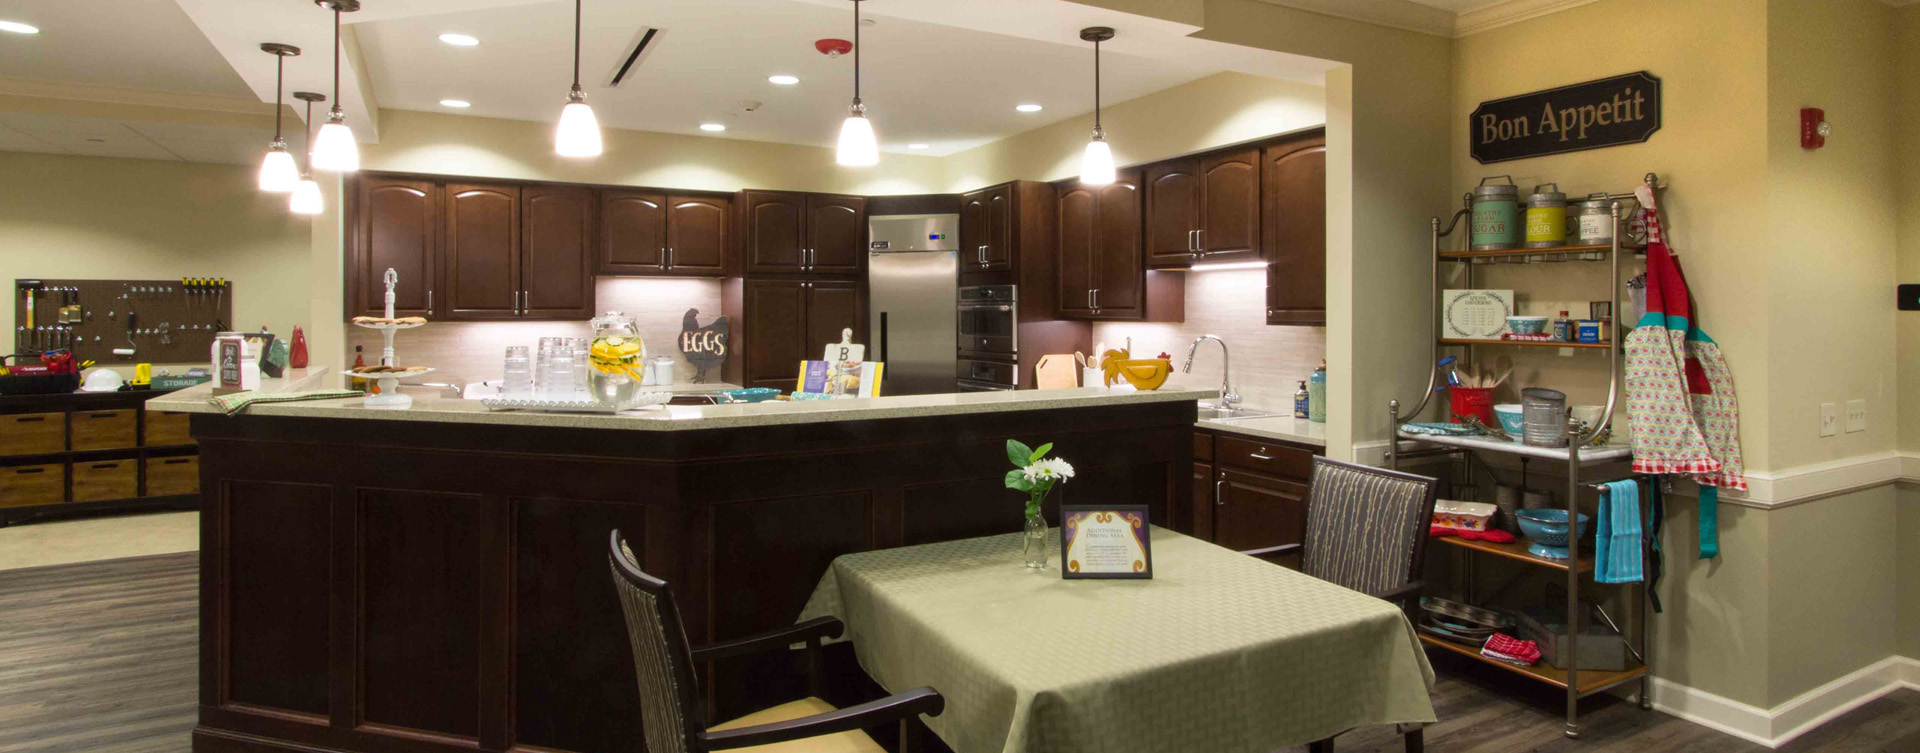 Mary B’s country kitchen evokes a sense of home and reconnects residents to past life skills at Bickford of Gurnee